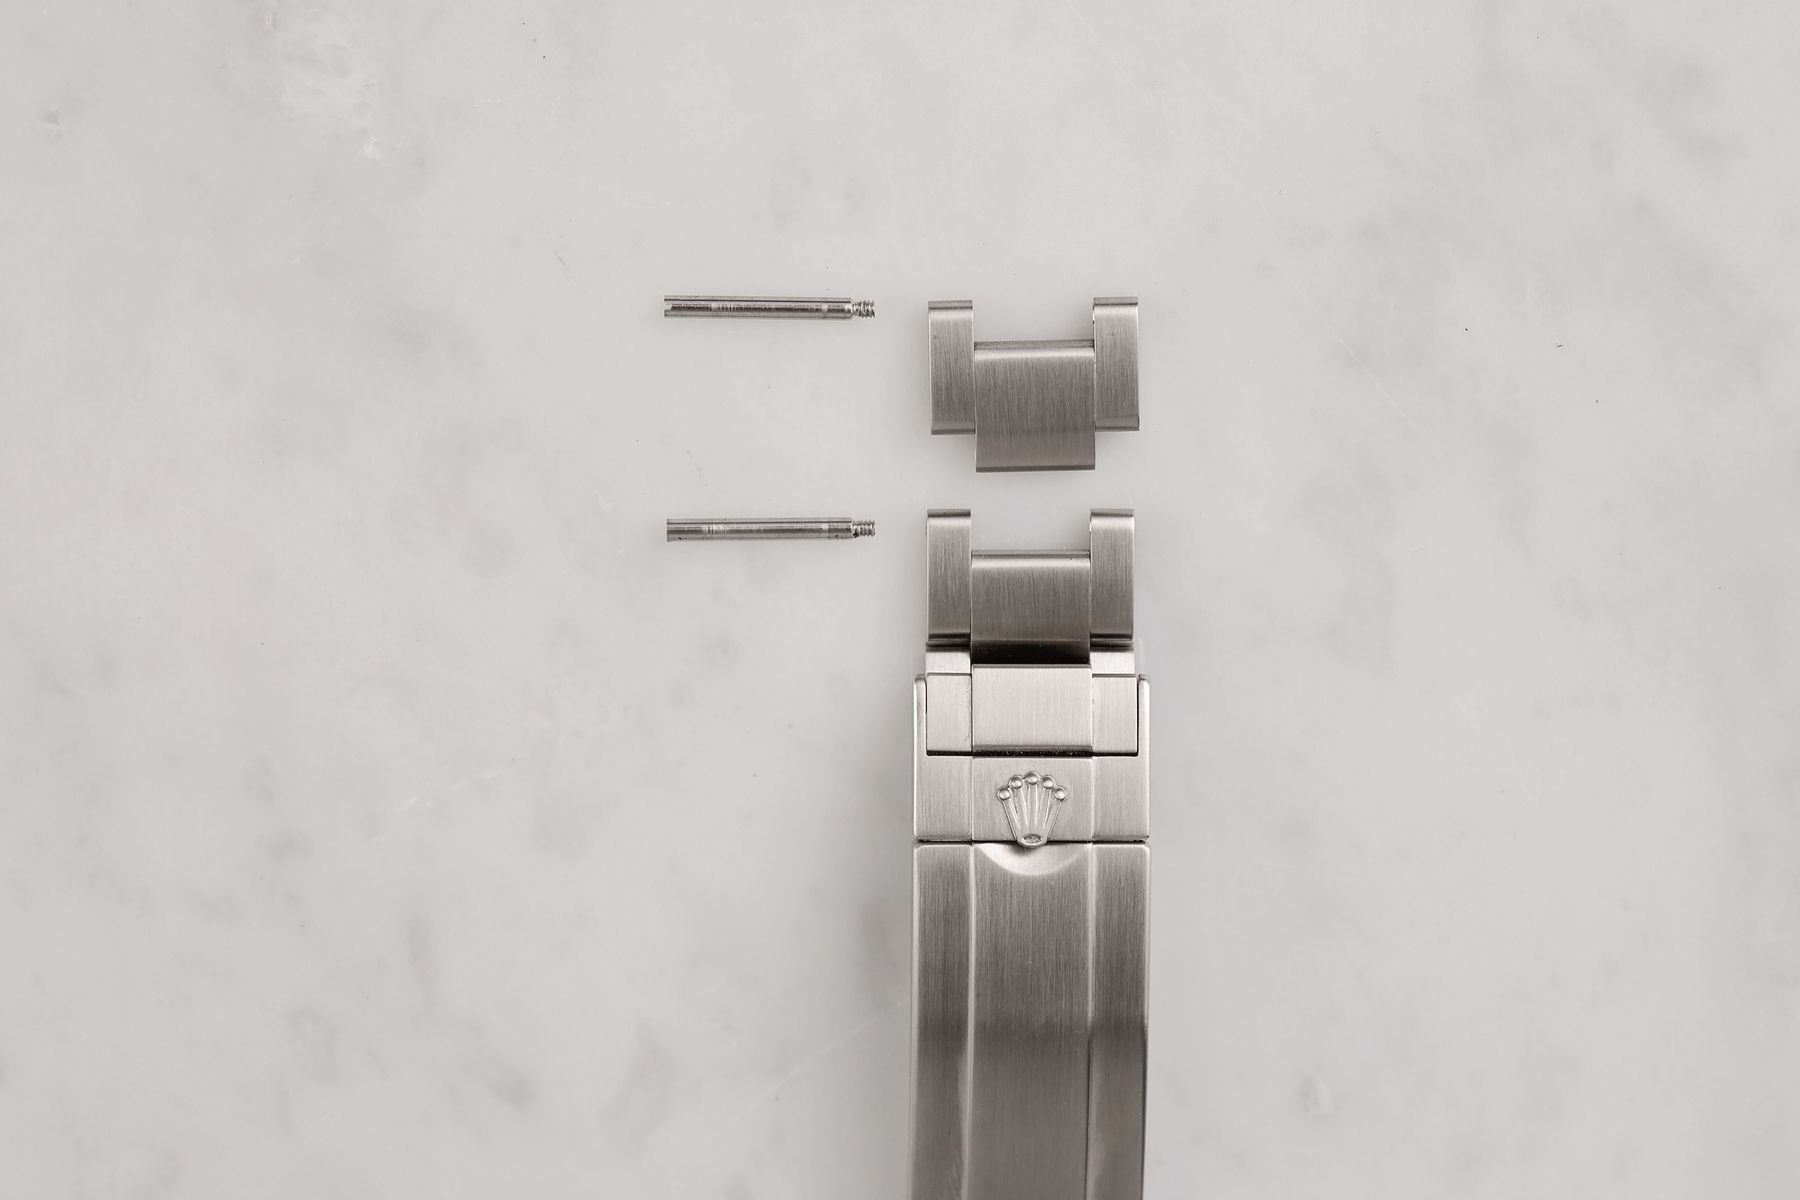 How To Add Rolex Links Bracelet Sizing Instructions 